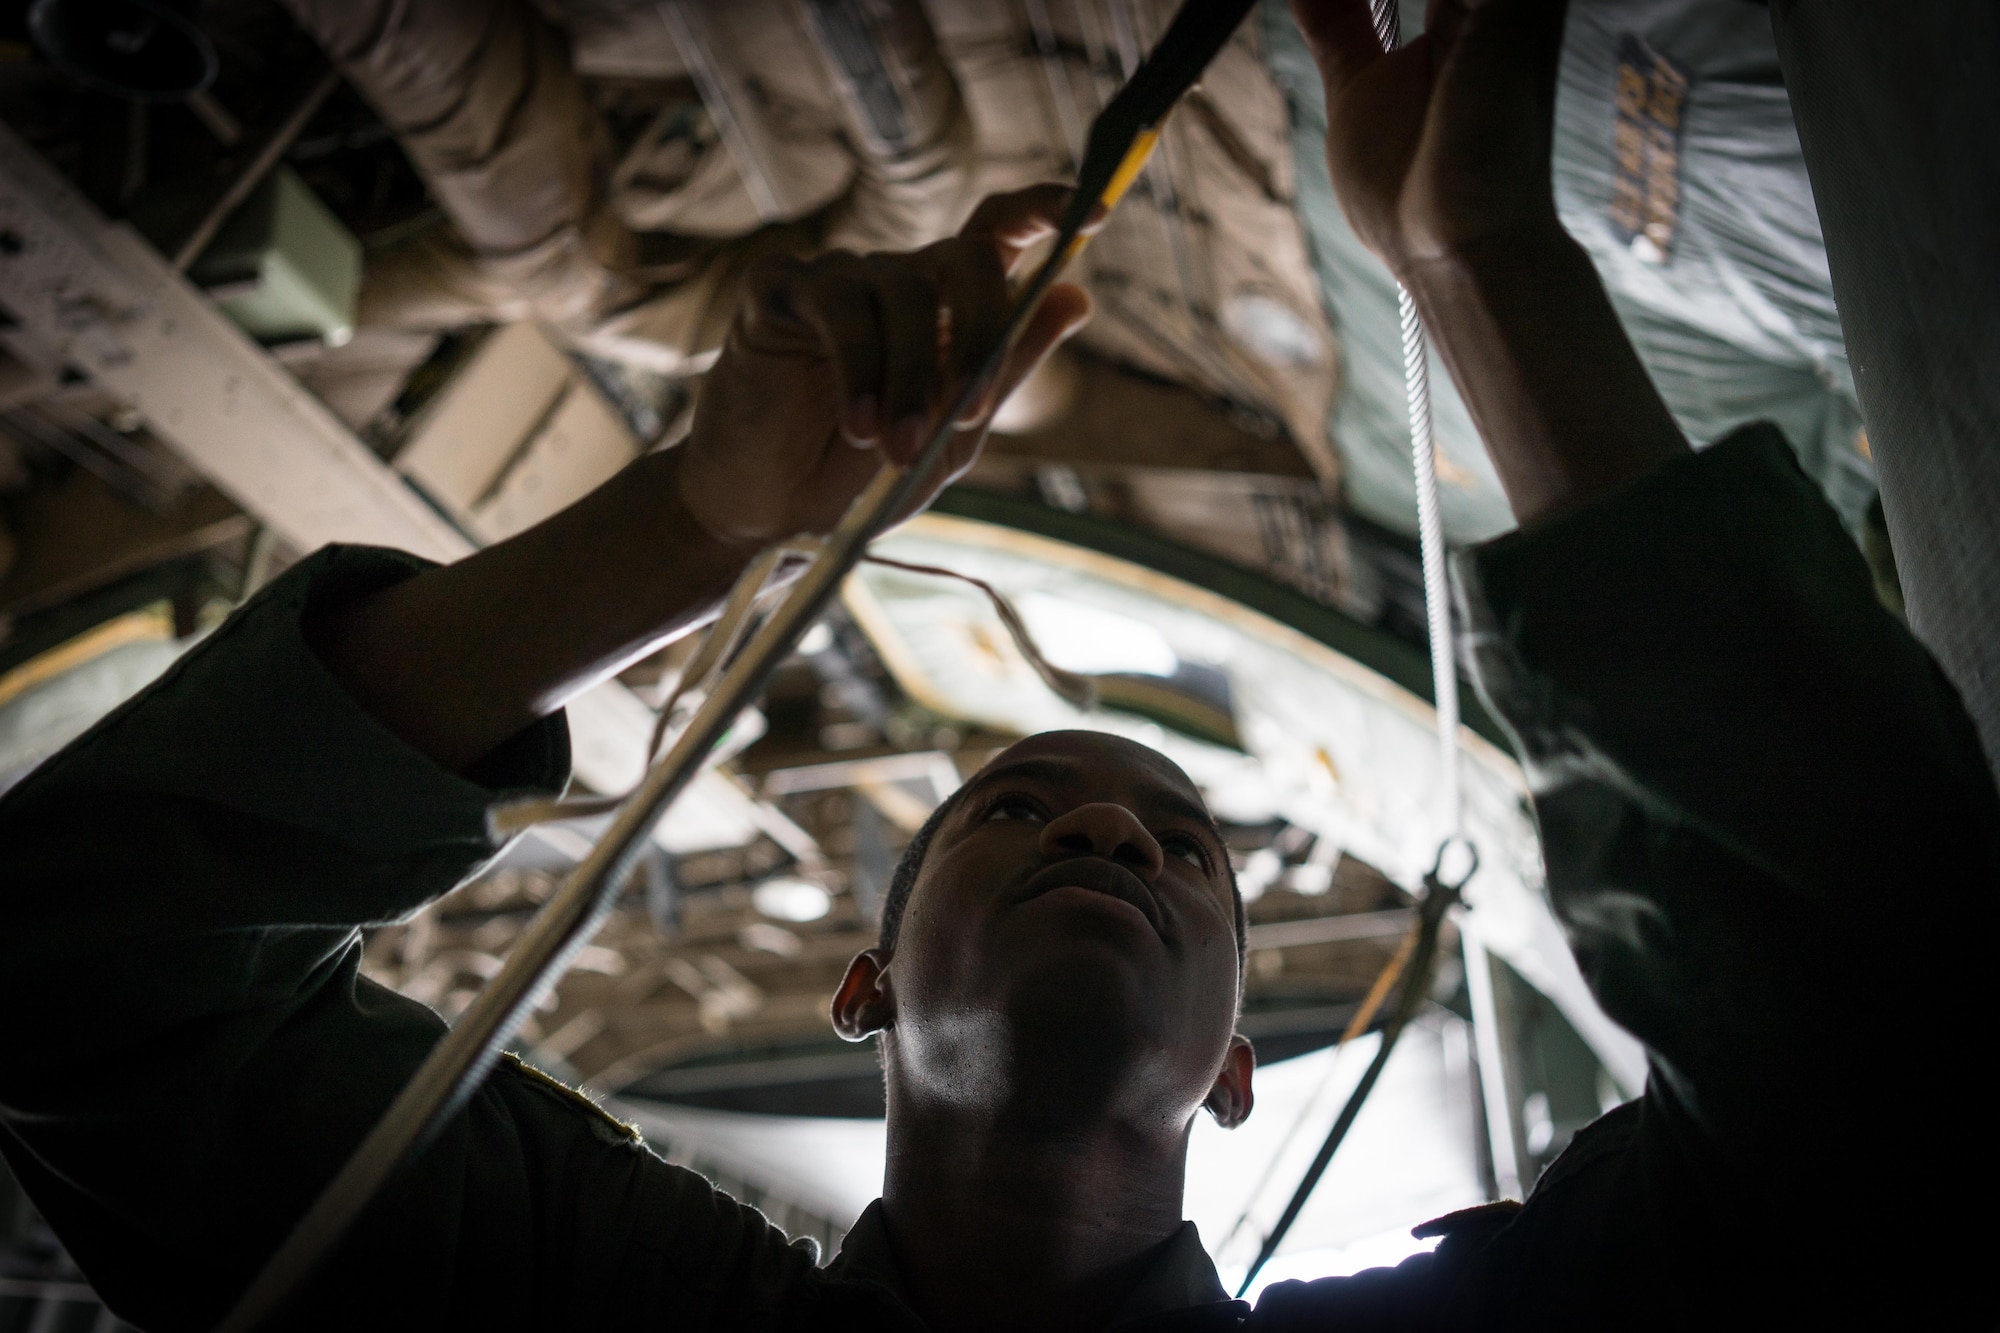 U.S. Air Force Senior Airman Adrian Robinson, 36th Airlift Squadron joint airdrop inspector, inspects the static line rigging on a container delivery system bundle during Red Flag Alaska on Joint Base Elmendorf-Richardson, Alaska, Aug. 12, 2016. Bundles that are improperly rigged can lead to malfunctions which hold the risk of damaging aircraft, personnel and can lead to mission failure. (U.S. Air Force photo by Staff Sgt. Michael Smith/Released)